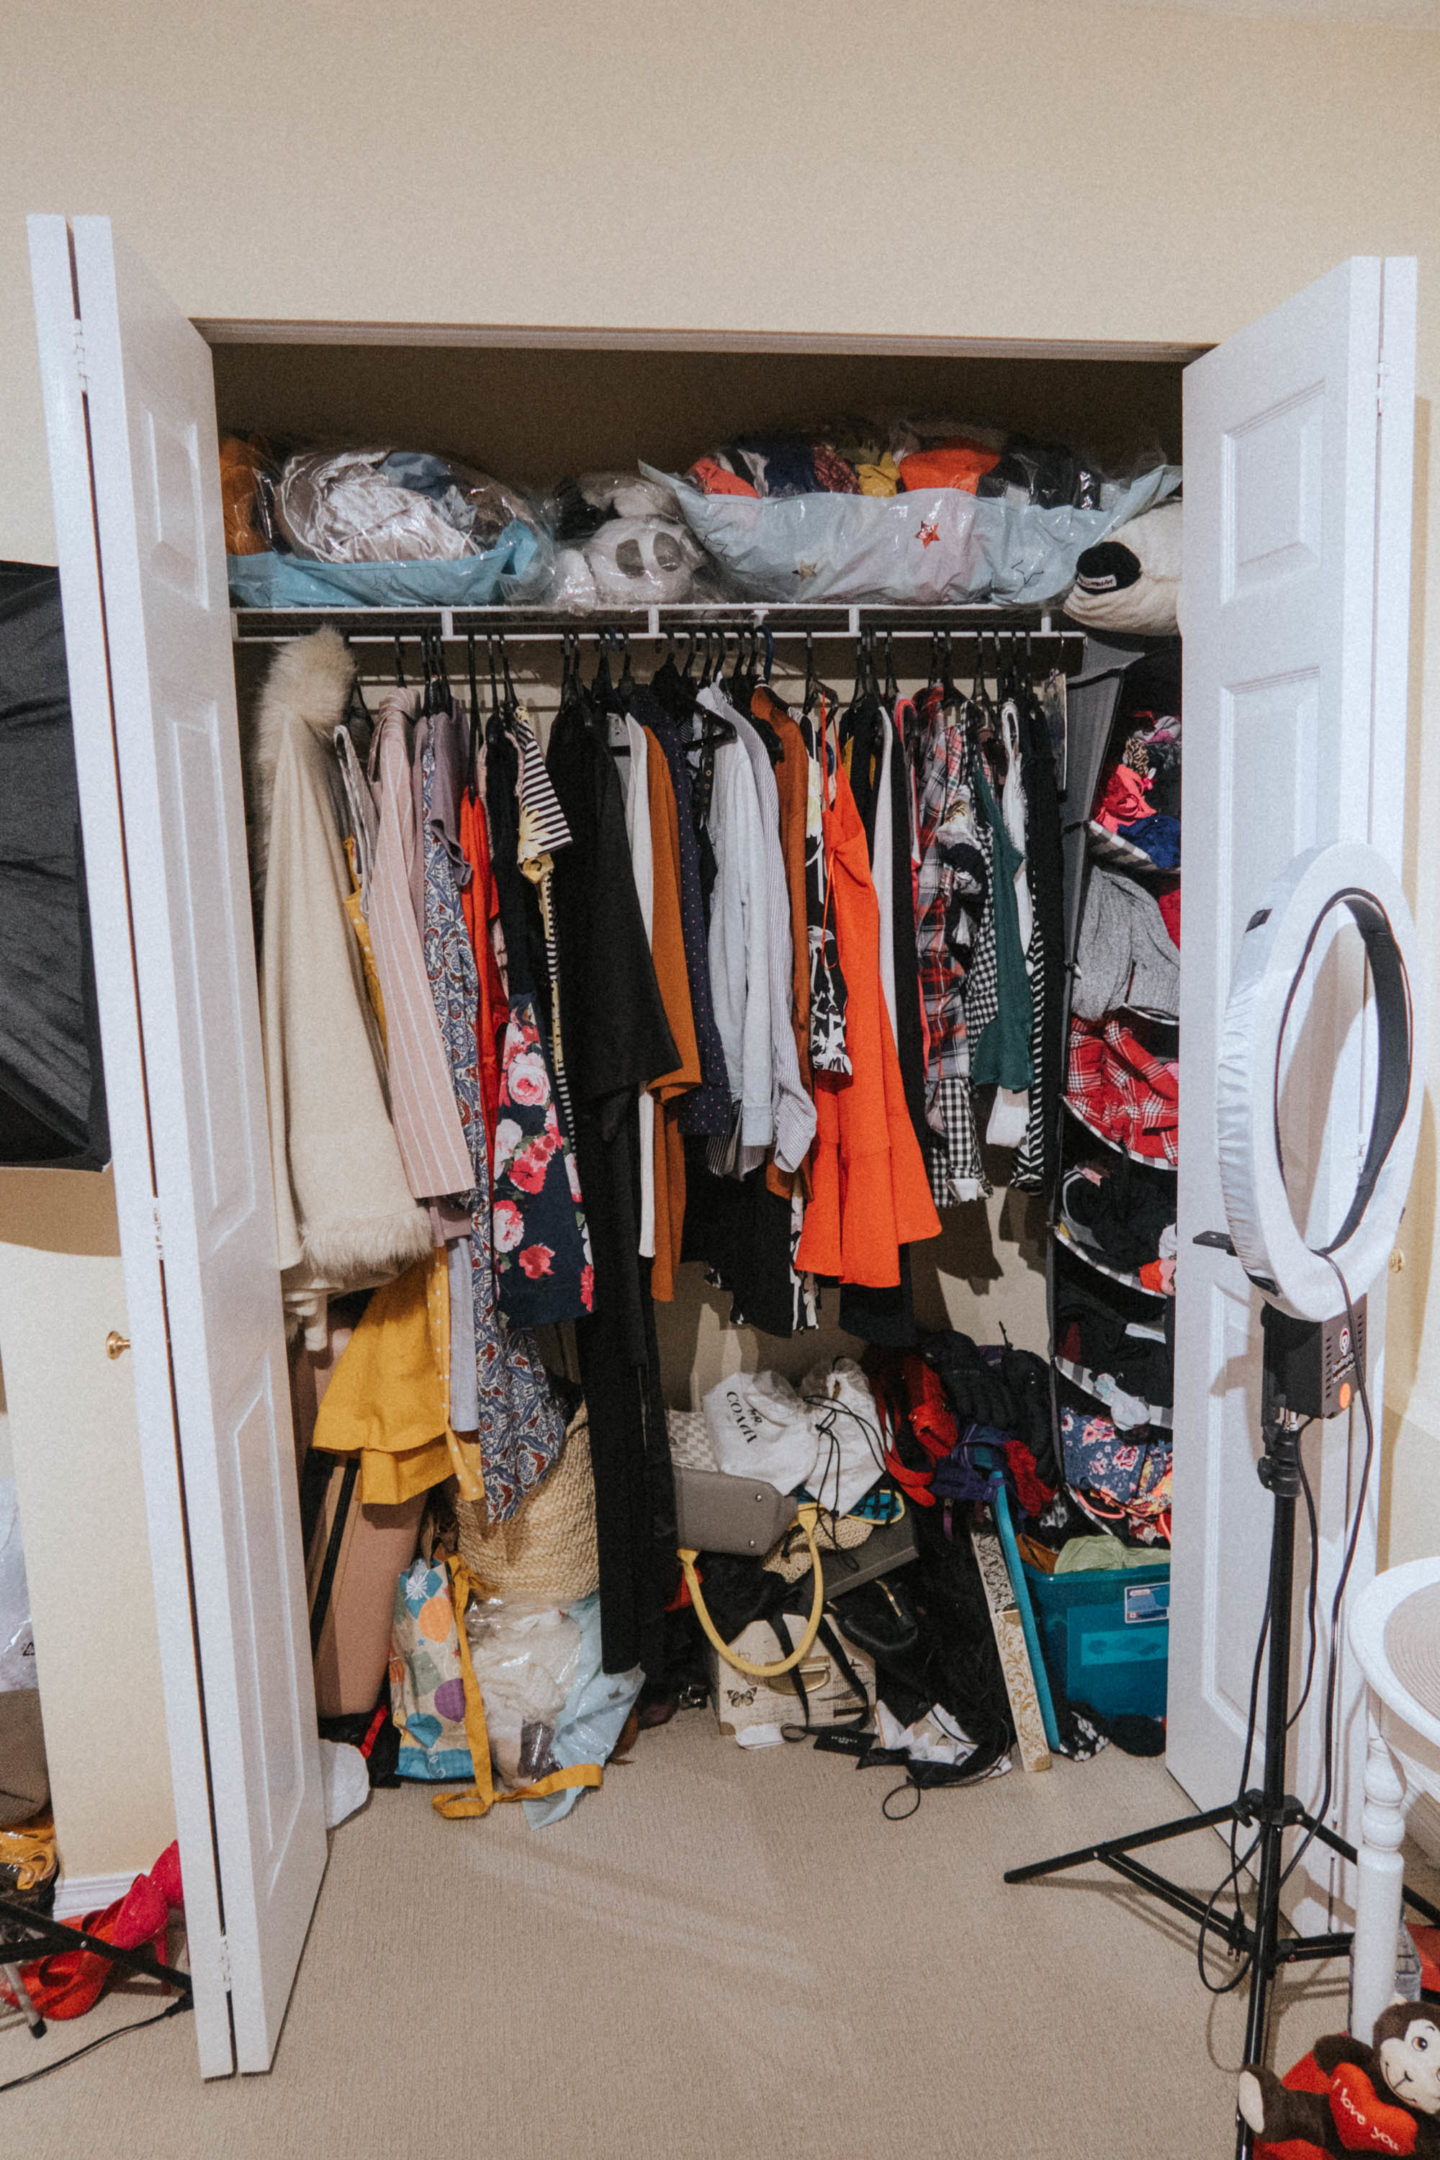 My overflowing closet before I started using the Konmari Method to organize and spark joy